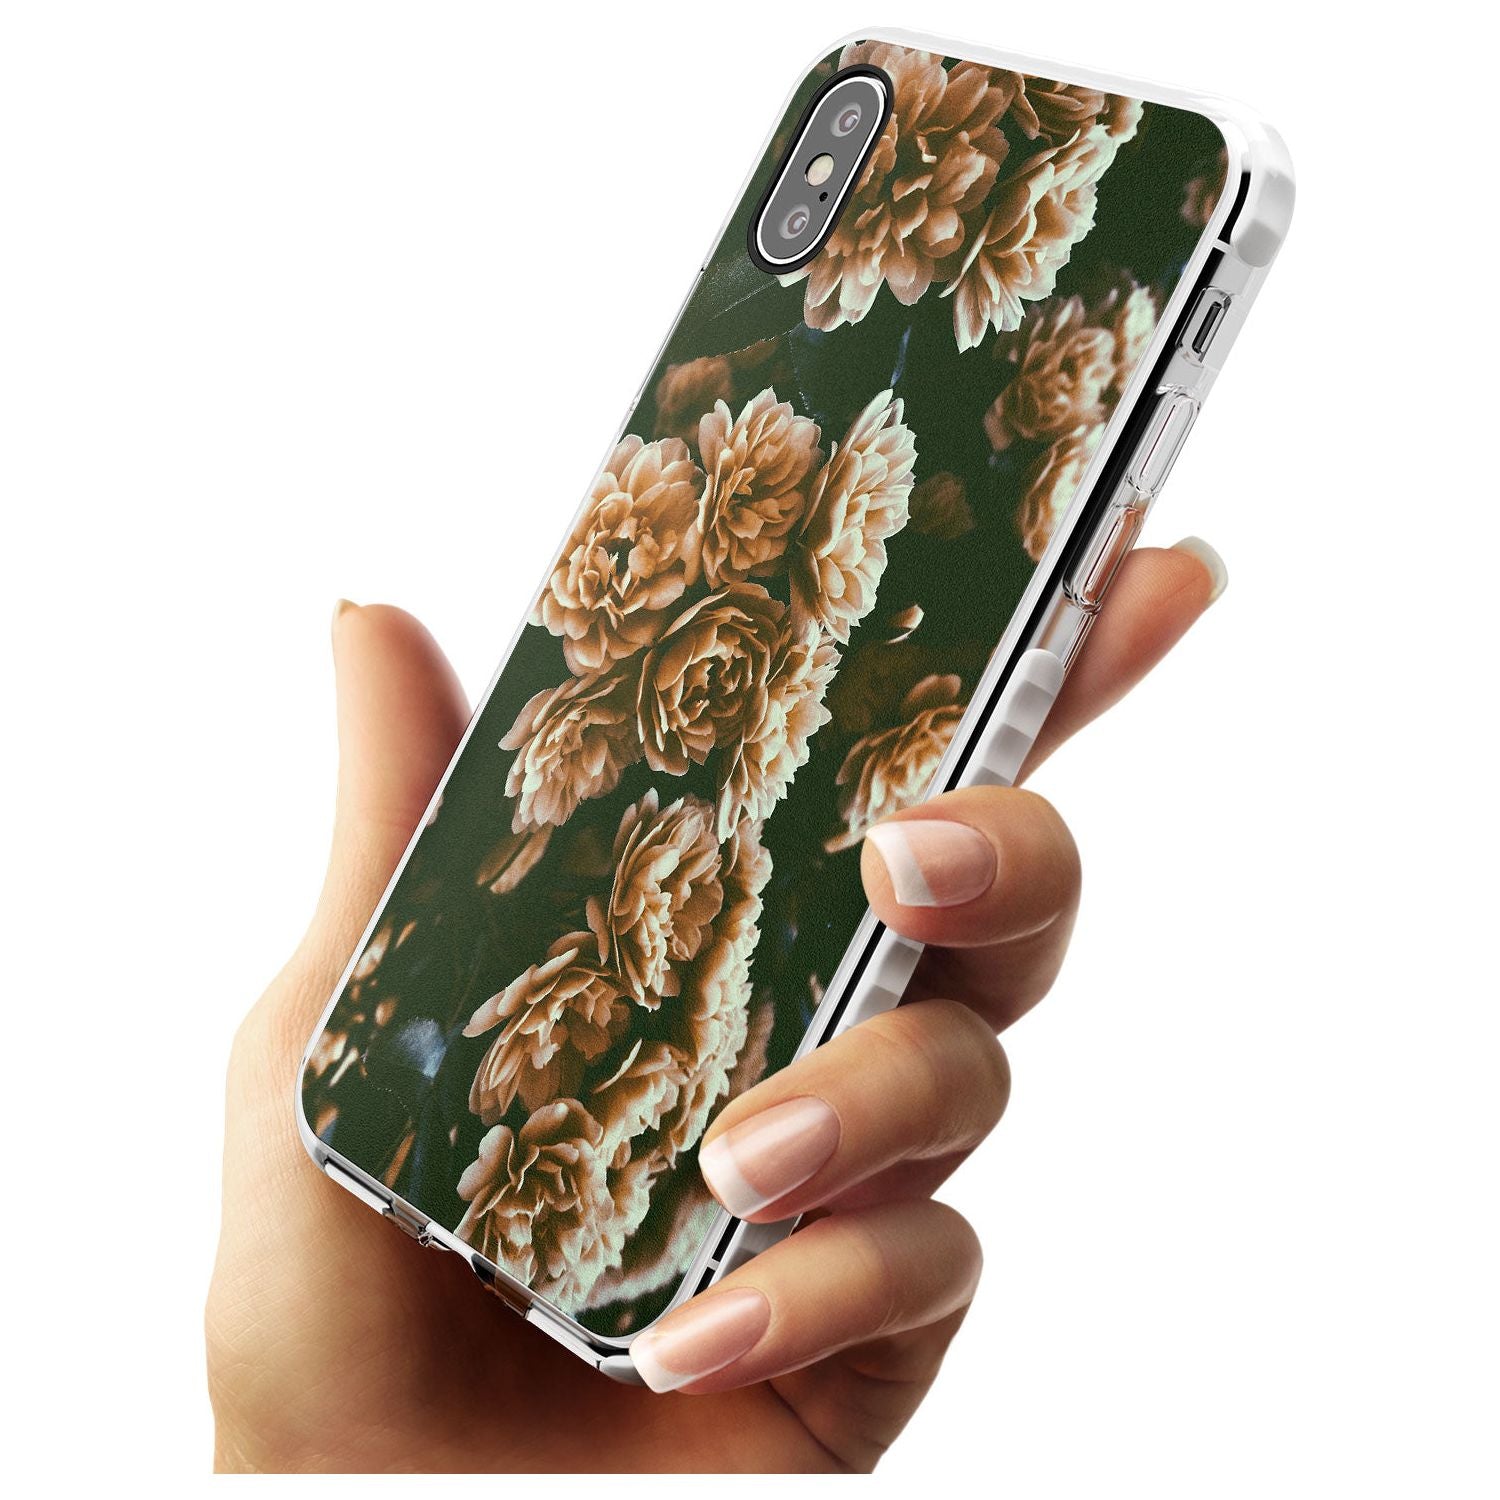 White Peonies - Real Floral Photographs Impact Phone Case for iPhone X XS Max XR